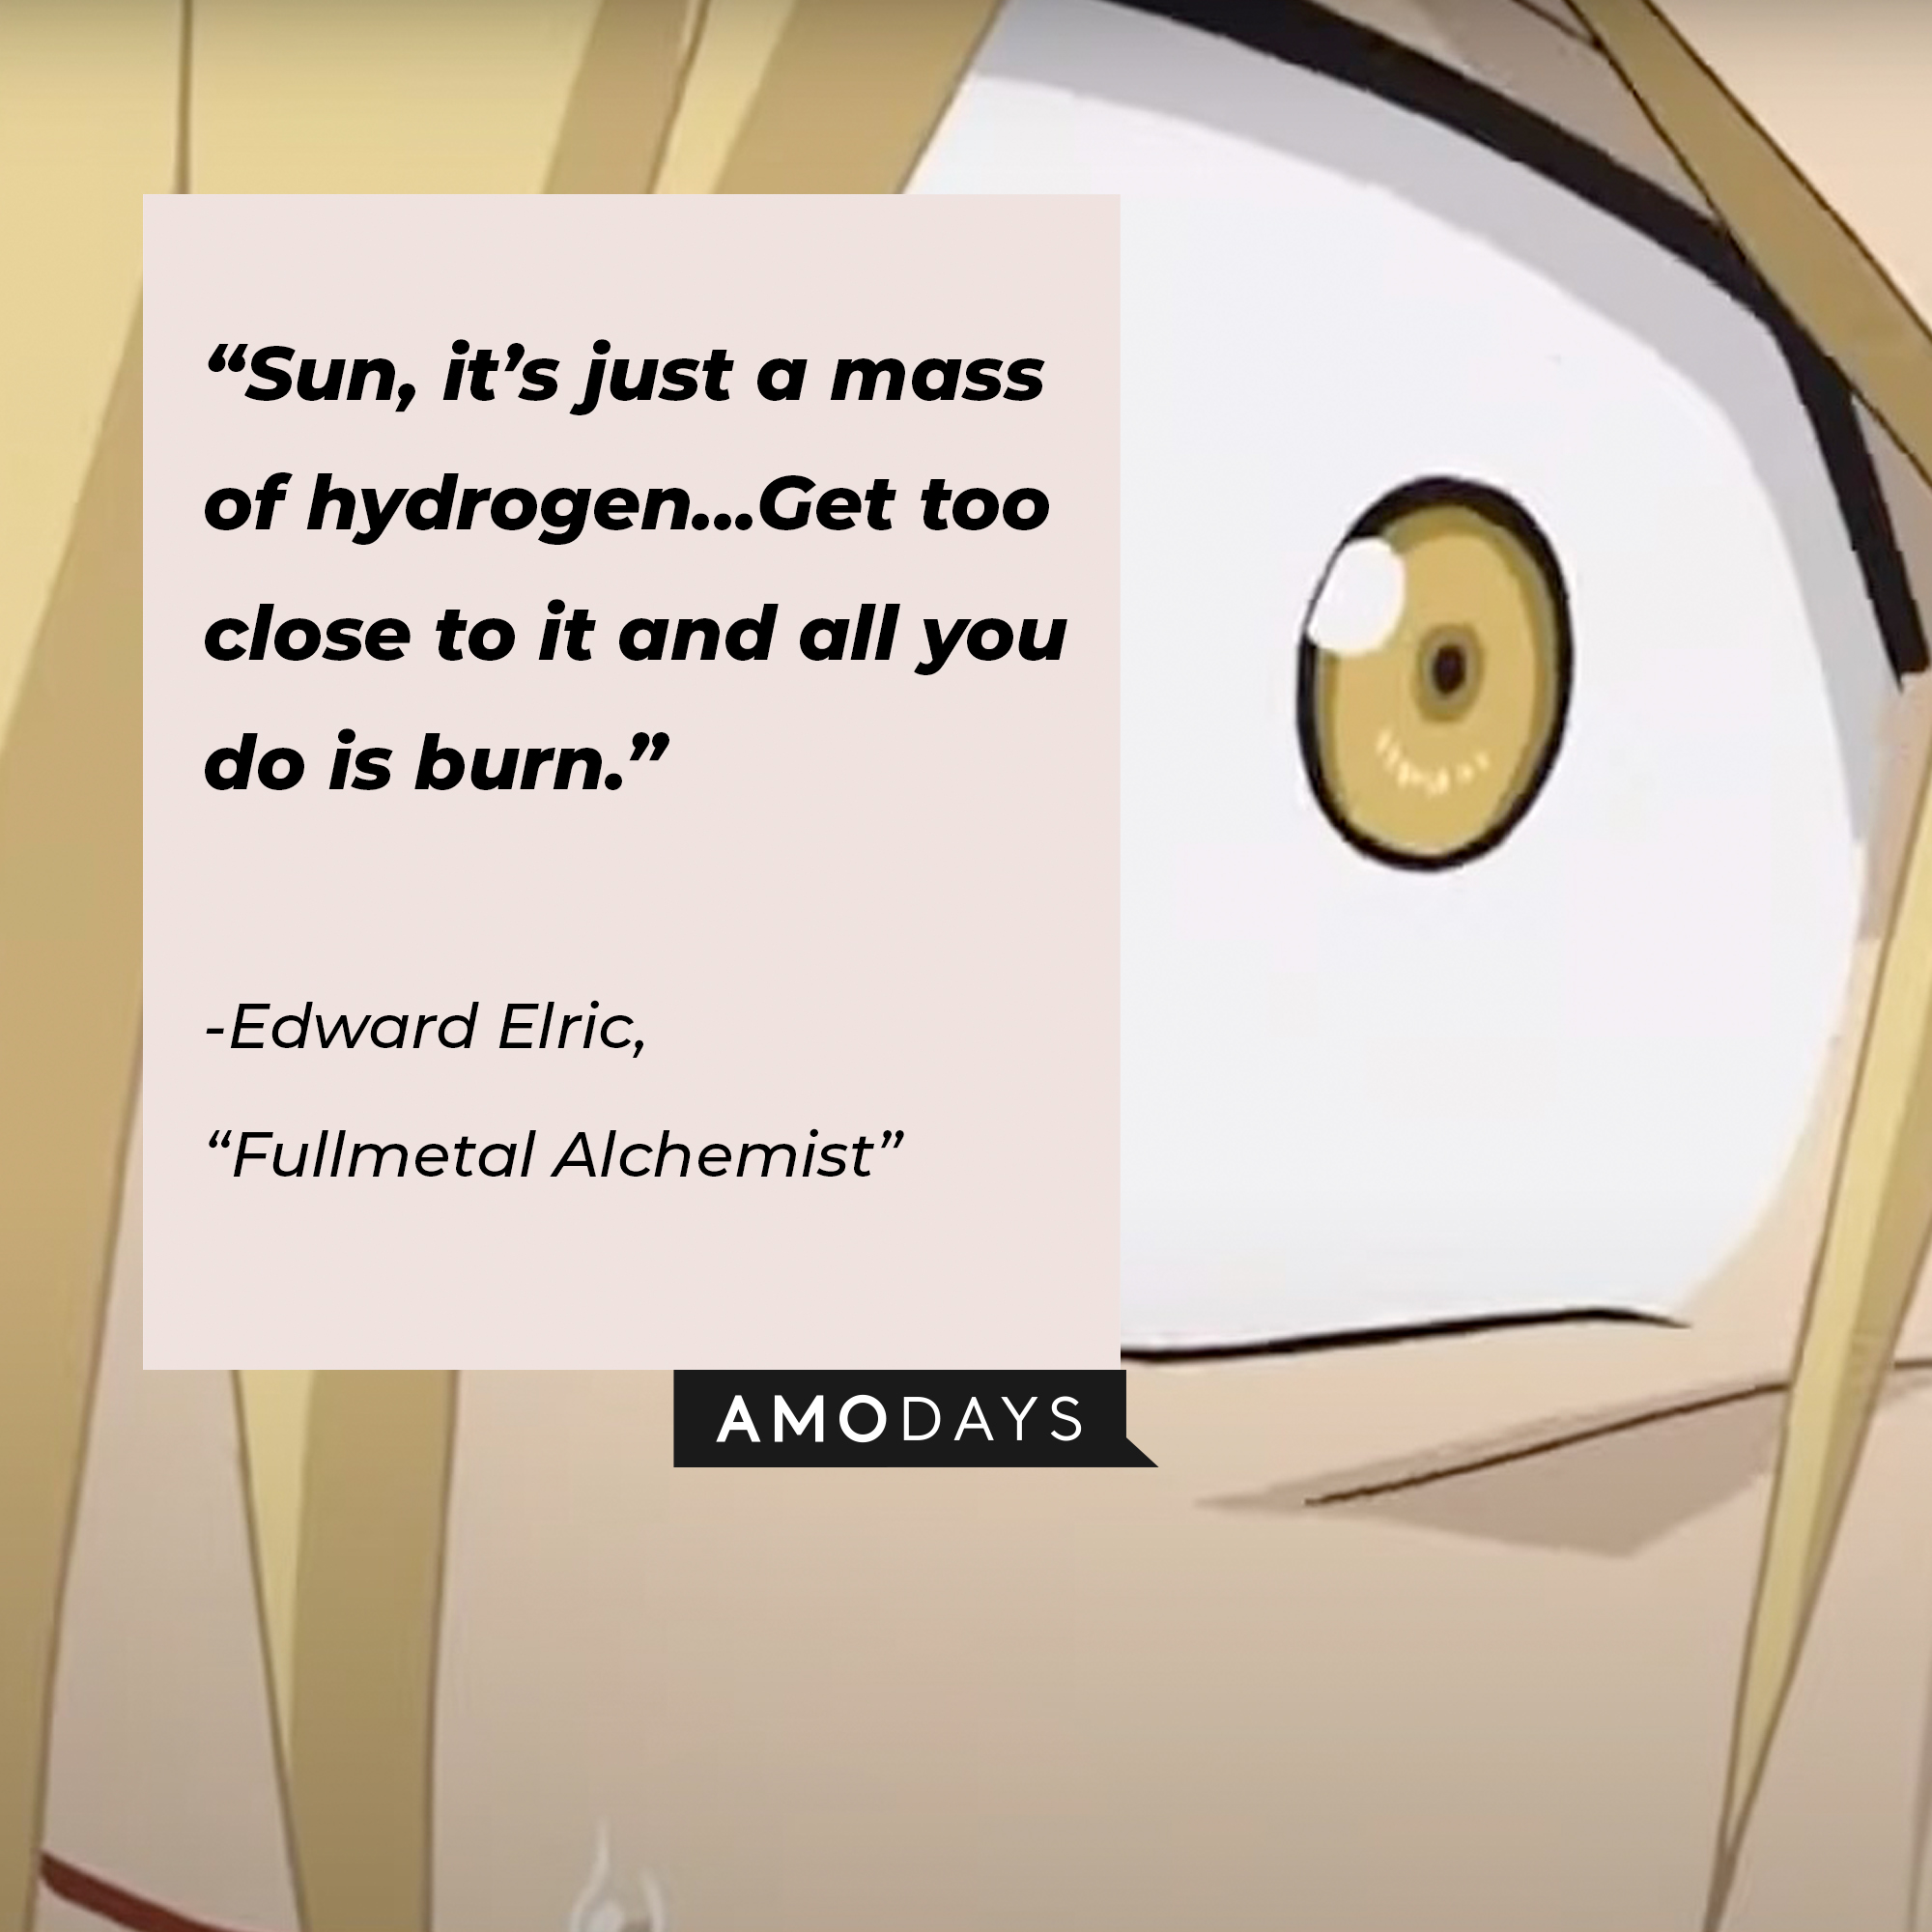 Edward Elric's quote: “Sun, it’s just a mass of hydrogen… Get too close to it and all you do is burn.” | Image: facebook.com/FMAHiromuArakawa